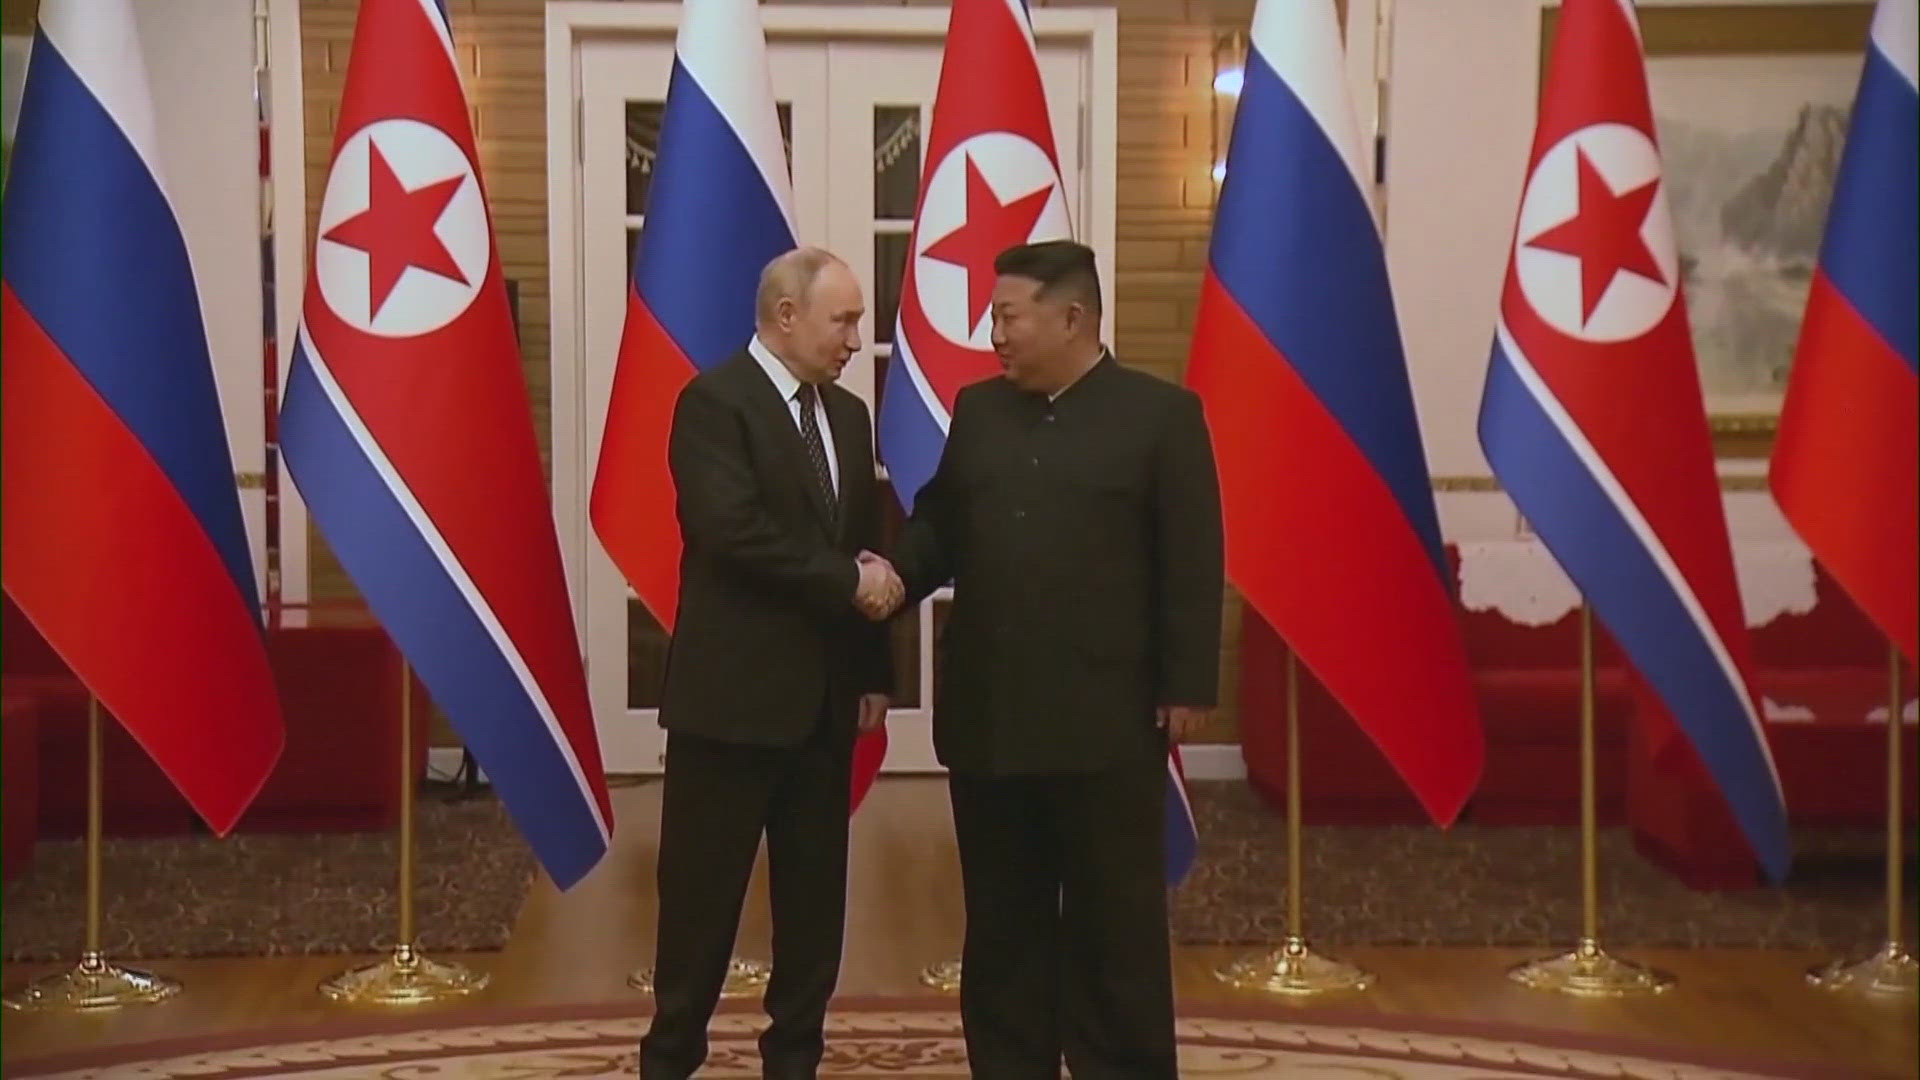 The deal could mark the strongest connection between Moscow and Pyongyang since the end of the Cold War.